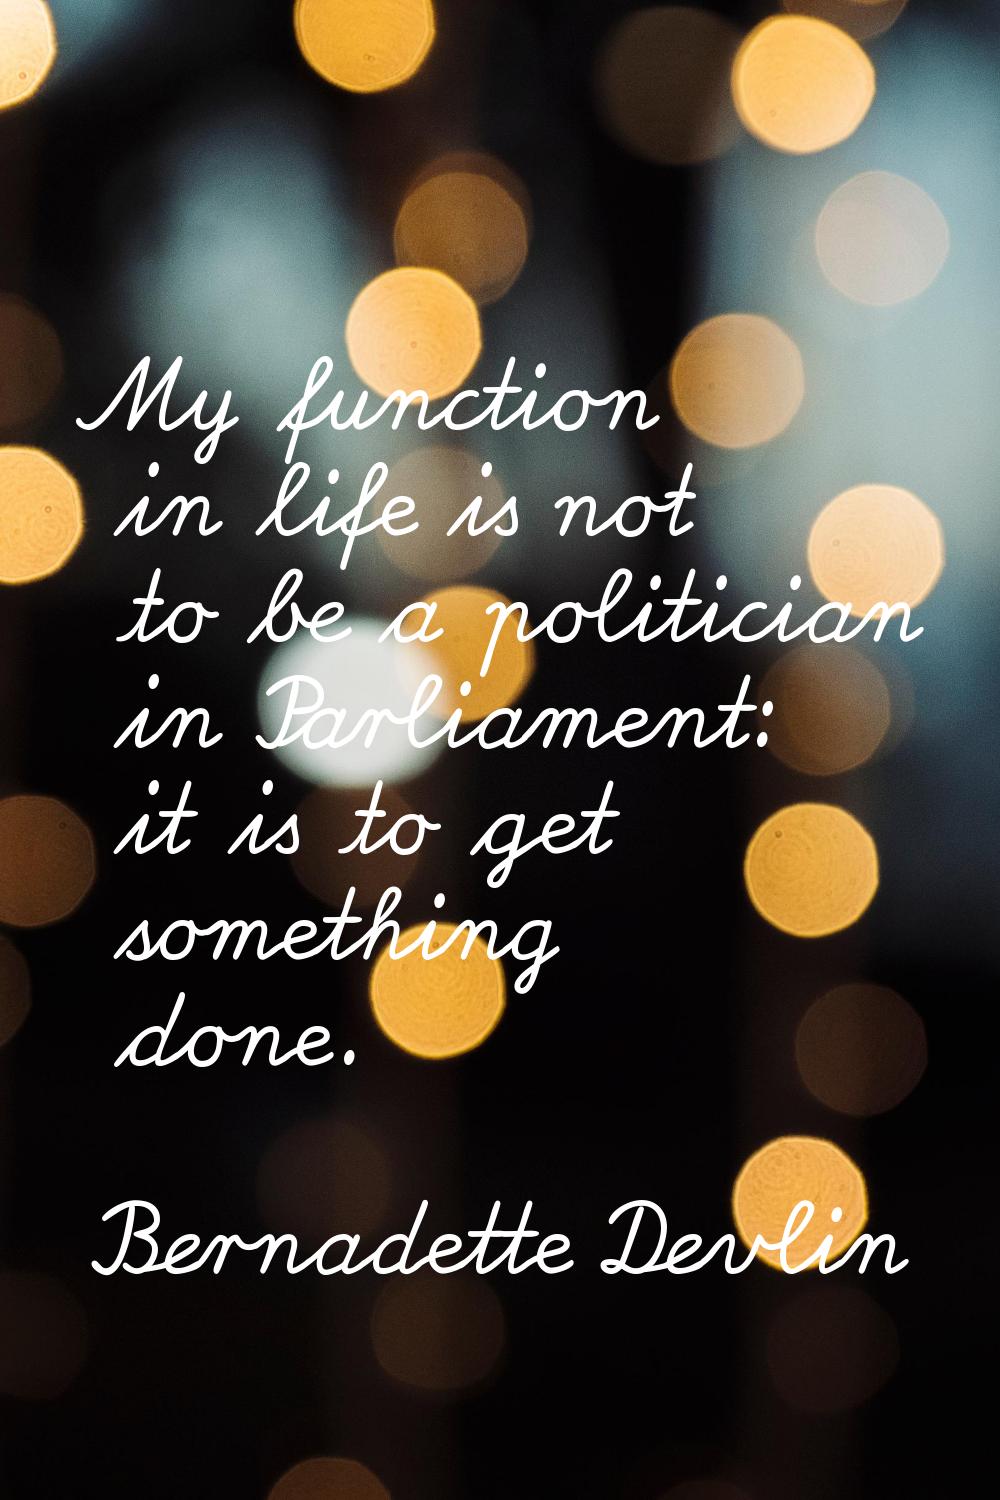 My function in life is not to be a politician in Parliament: it is to get something done.